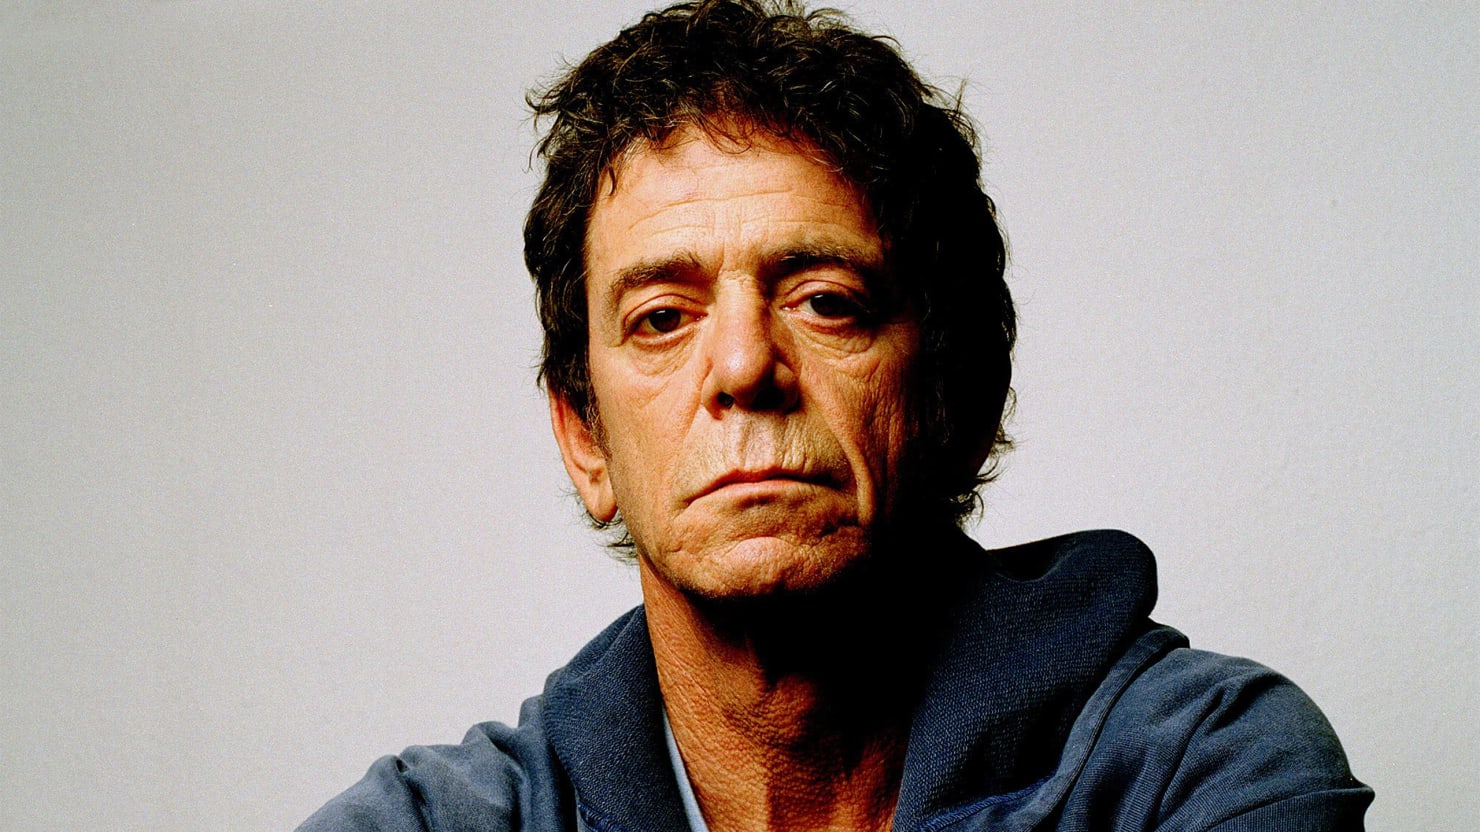 Lou Reed: An influence who spanned generations – Daily Freeman